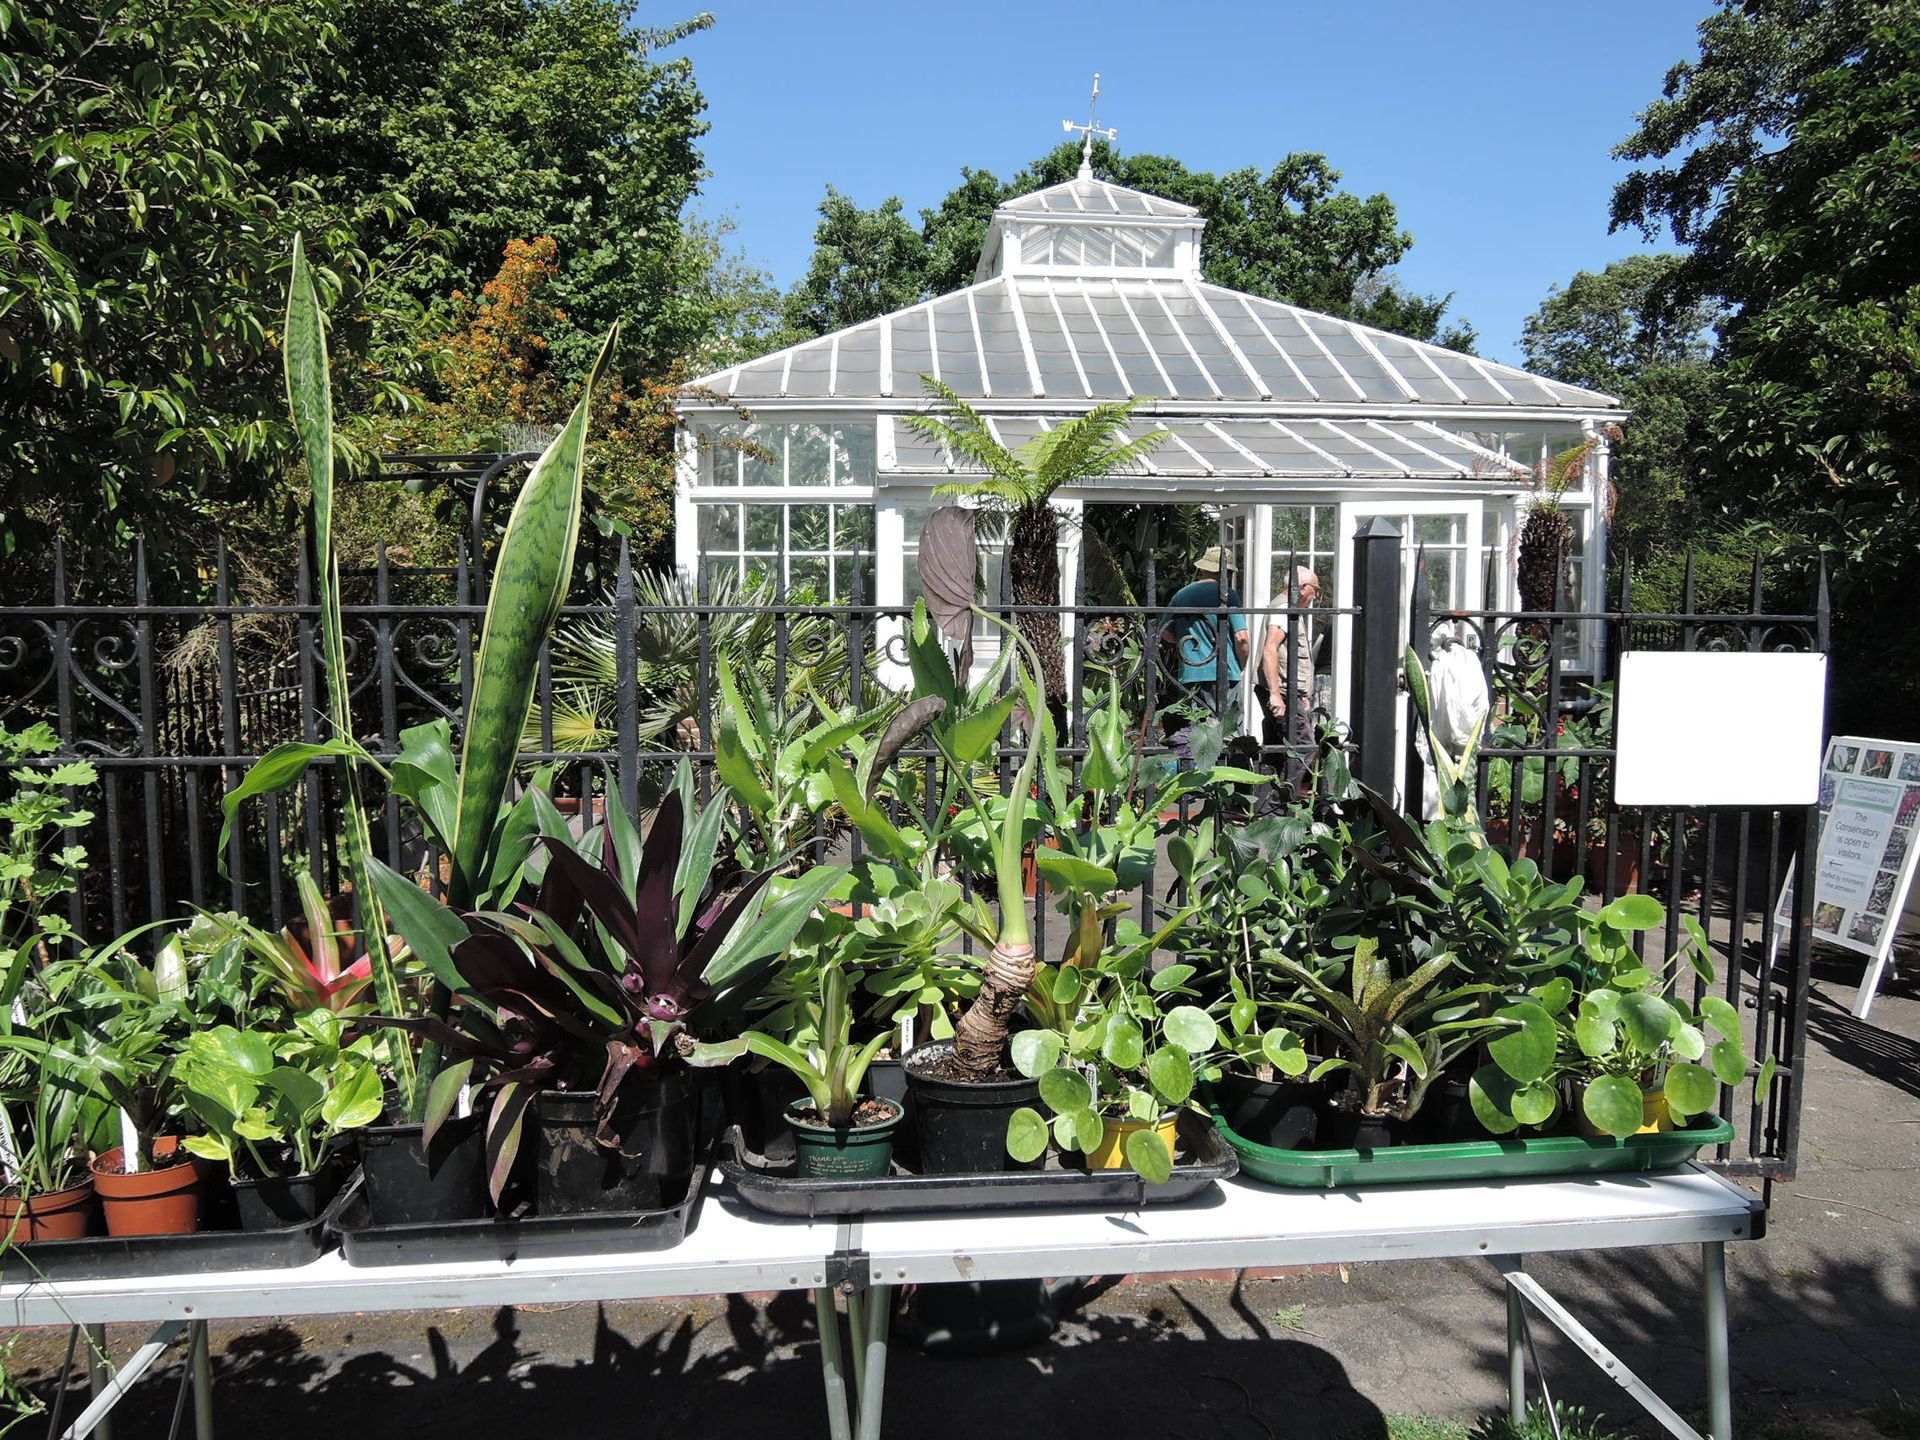 A table full of potted plants in front of a greenhouse